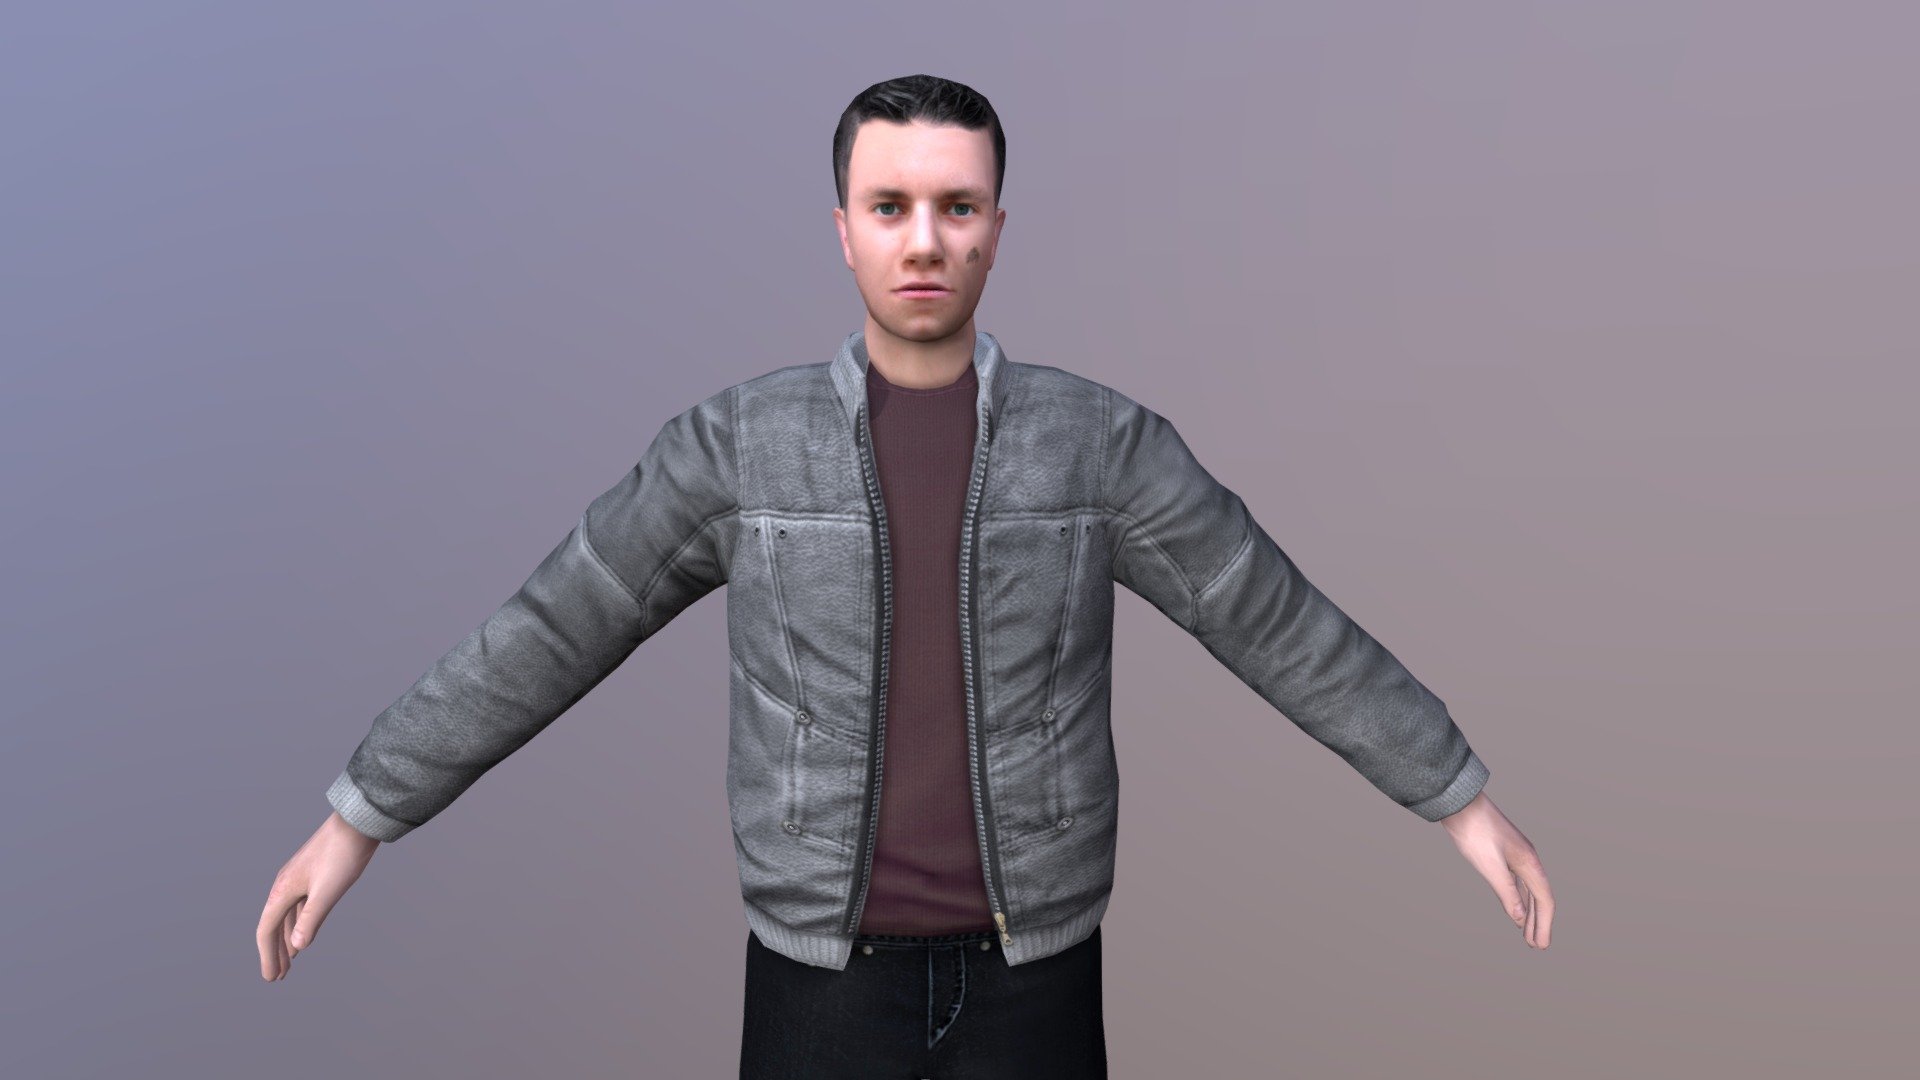 HUMAN CHARACTER WITH 250 ANIMATIONS

PLEASE VISIT MY PROFILE FOR VIEW AND DOWNLOAD MORE LOW POLY AND REALISTIC HIGH POLY CHARACTERS




AVAILABLE FILE FORMATS  :-

3DS MAX (.MAX) - 2017 

MAYA  (.MA ) - 2017

UNITY   (.UNITYPACKAGE)  -2018

CINEMA 4D  (.C4D) - R19

BLENDER  (.BLEND) - 2.9

FBX   (.FBX)  VERSION- 7.4 

OBJ  (.OBJ) 

COLLADA  (.DAE)   

YOU CAN ALSO IMPORT IN &ldquo;UNREAL ENGINE